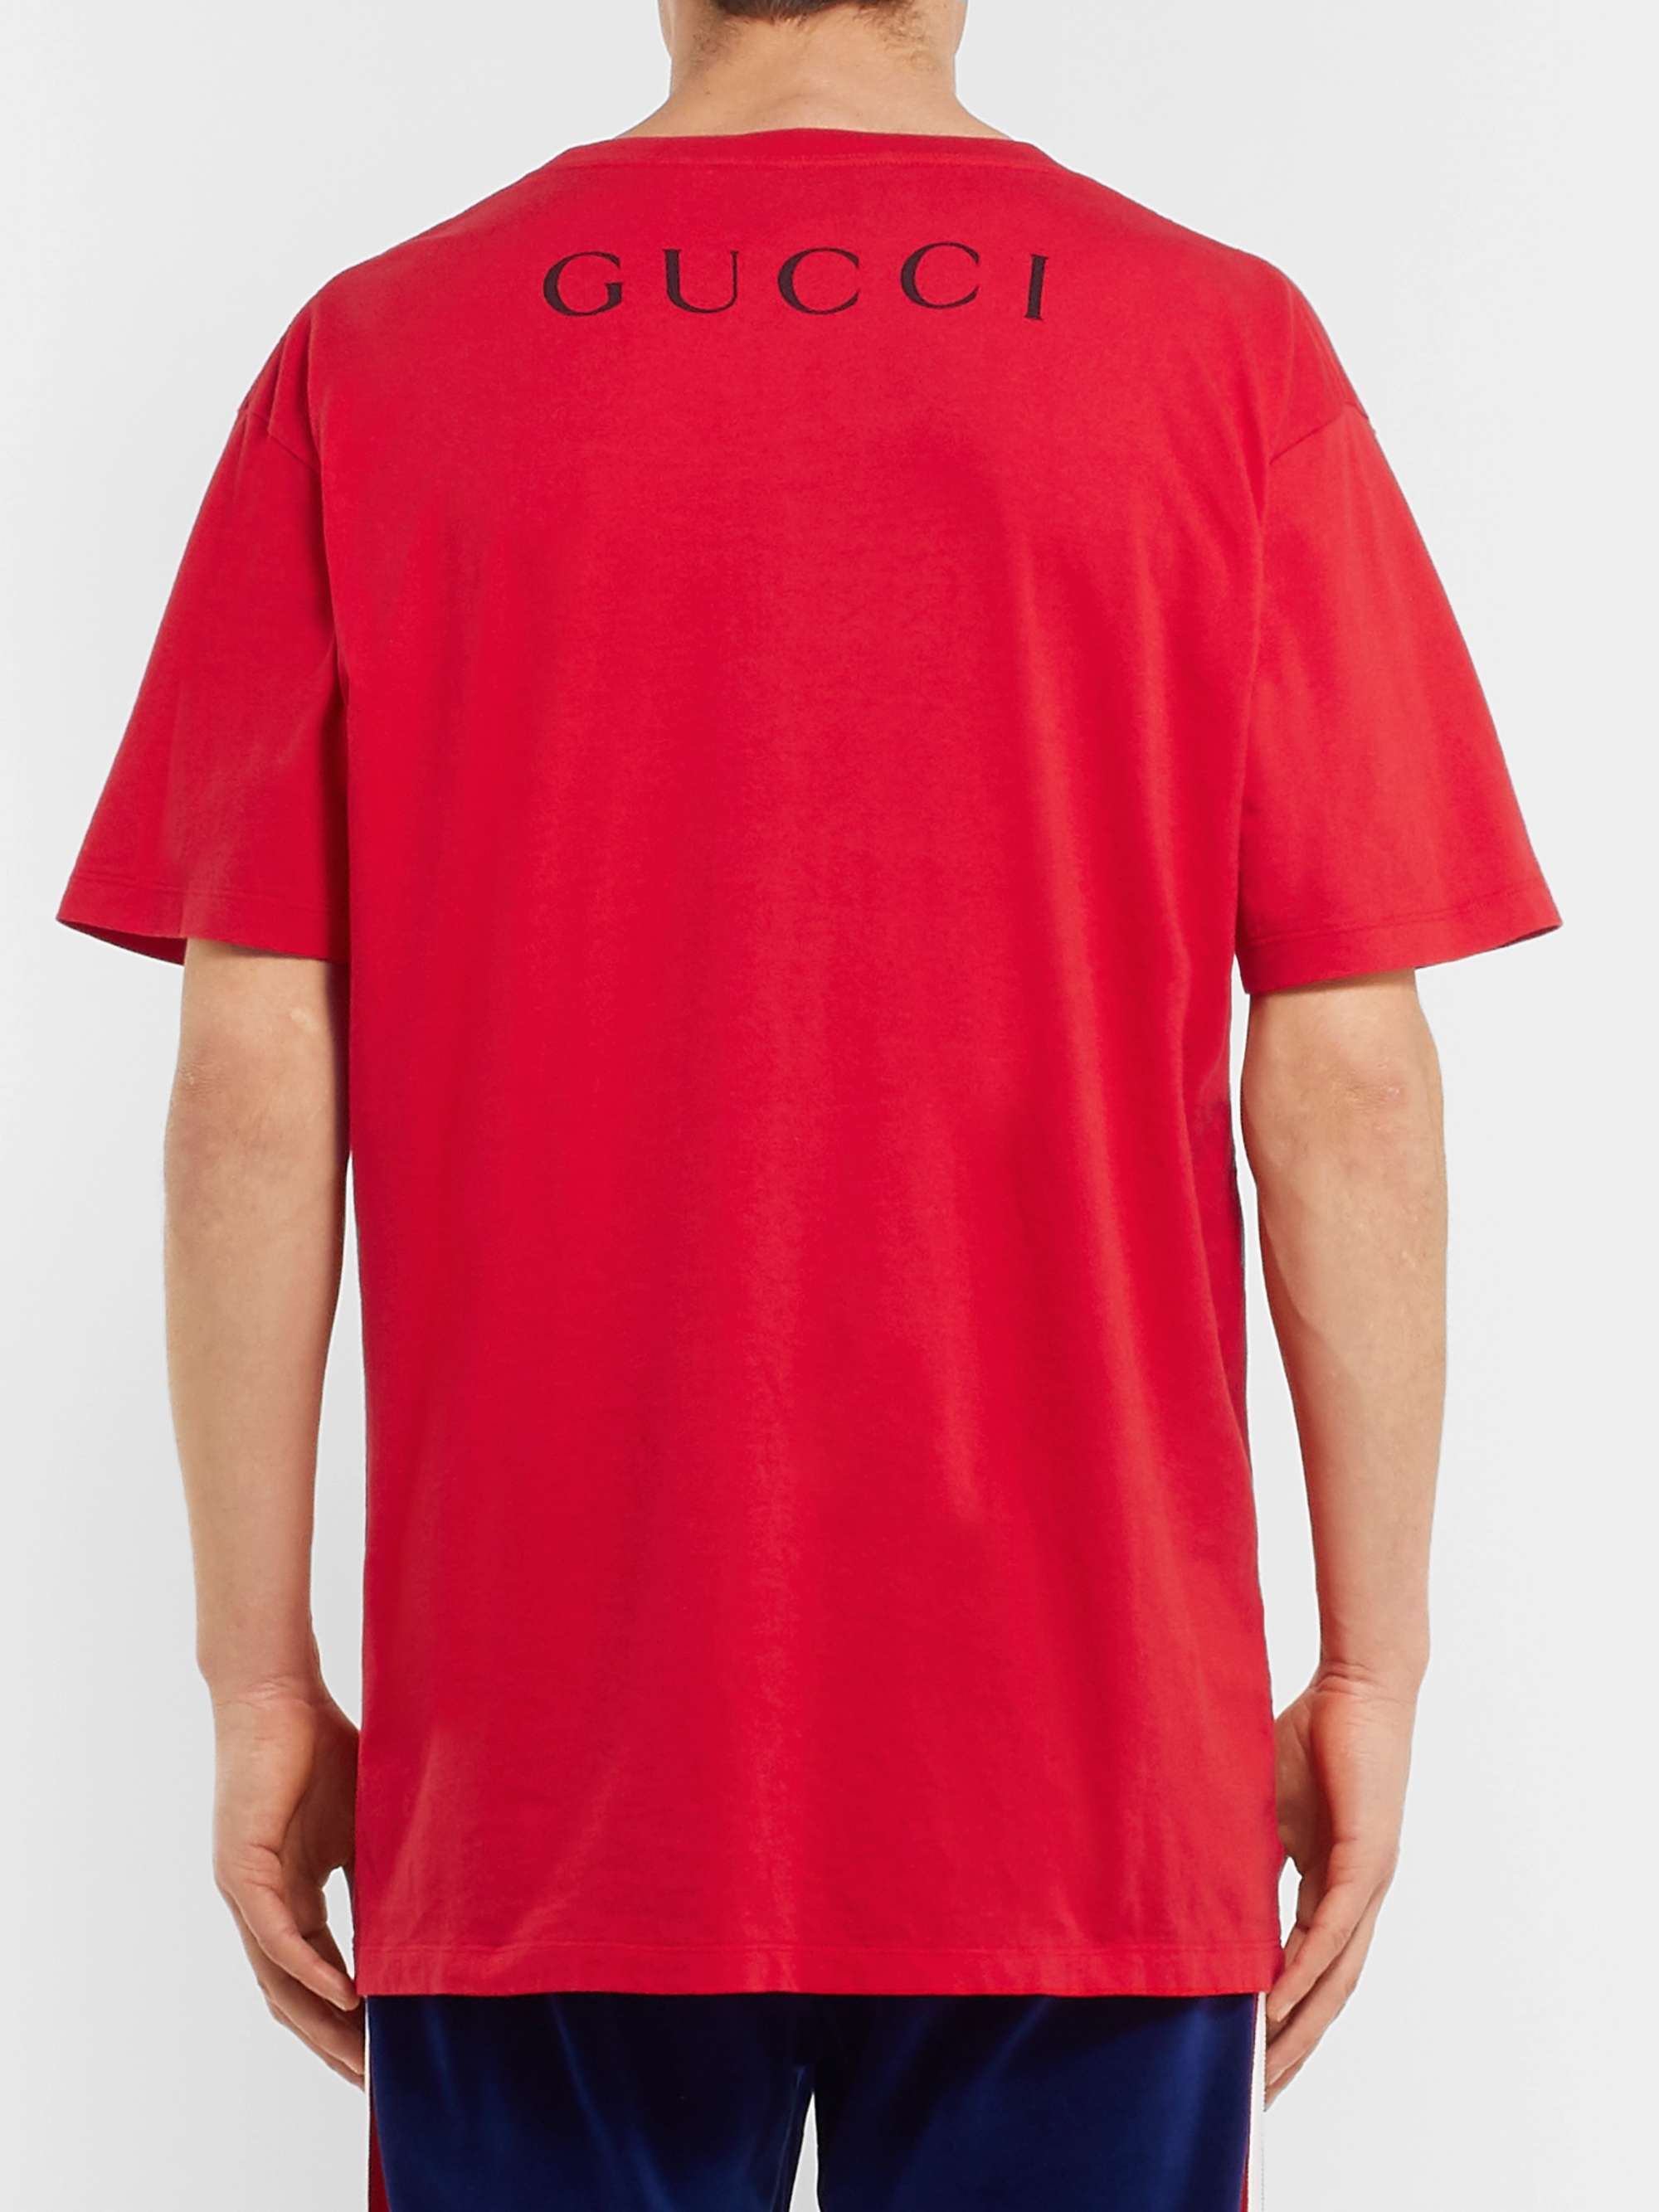 GUCCI Printed Cotton-Jersey T-Shirt for Men | MR PORTER